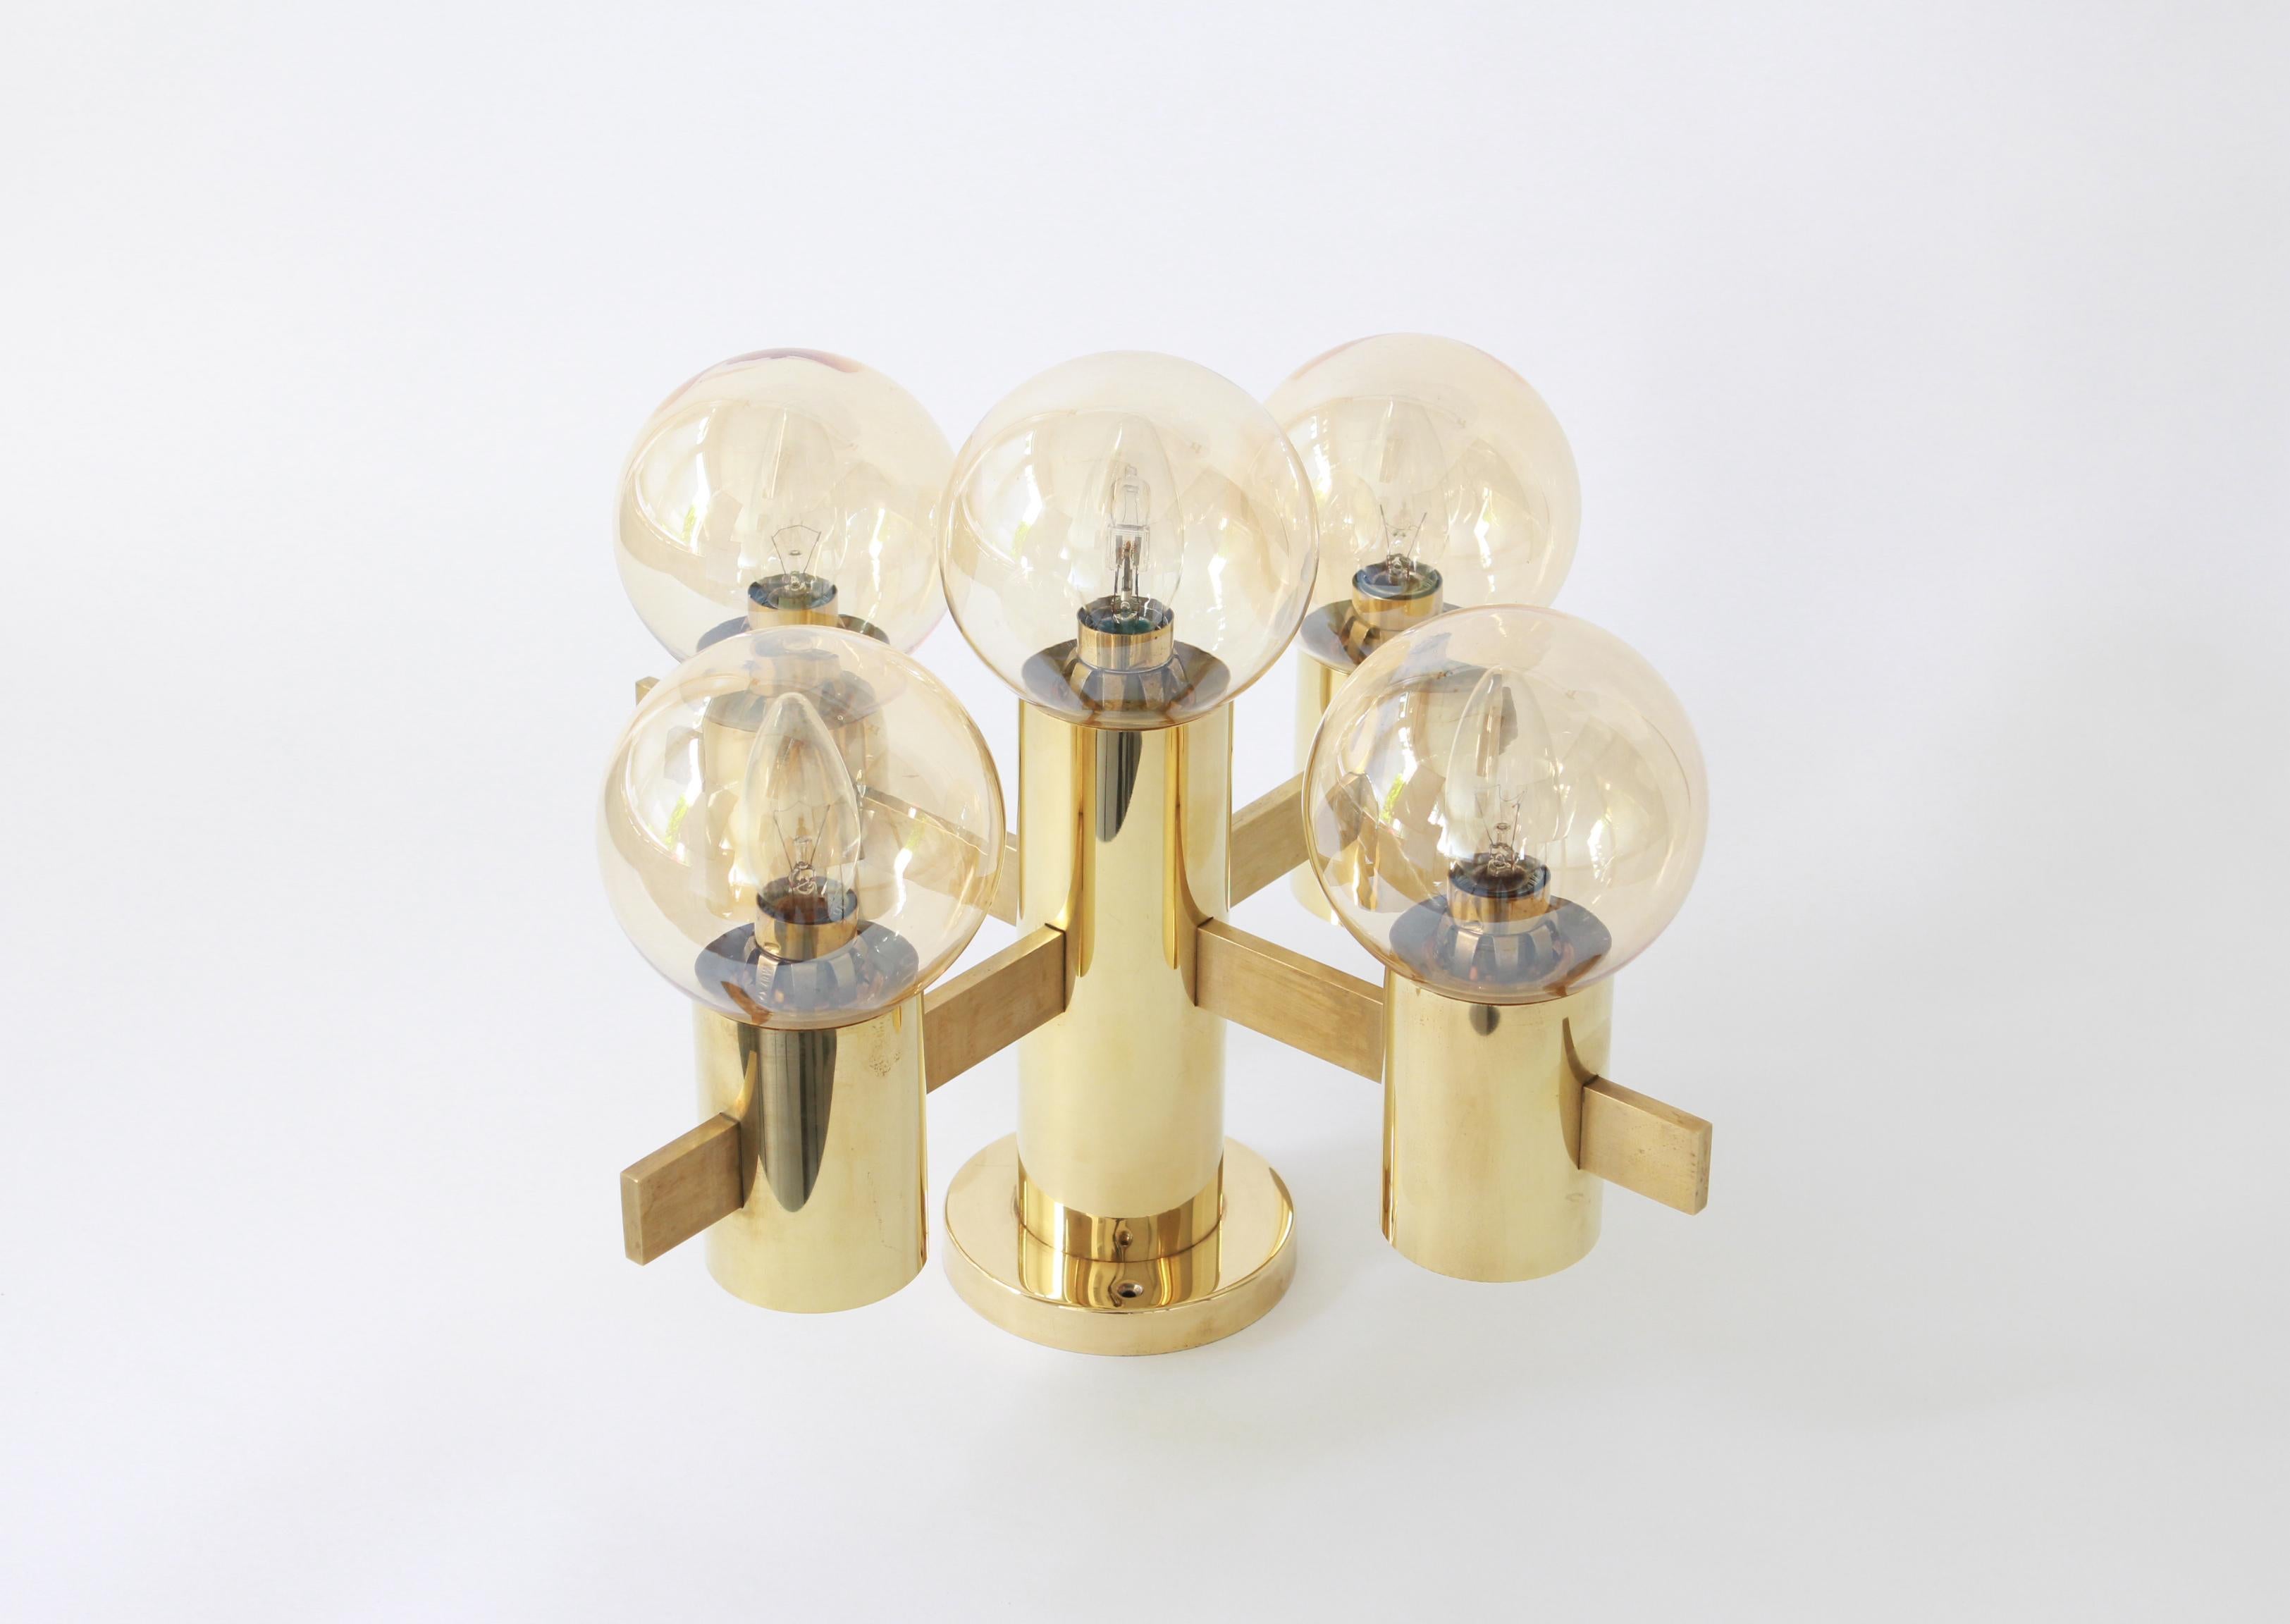 Five-light brass chandelier in the style of Sciolari.
Smoked glass in a very beautiful smokey brown color.
Made with brass, best of the 1960s.

High quality and in very good condition. Cleaned, well-wired and ready to use. 

The fixture